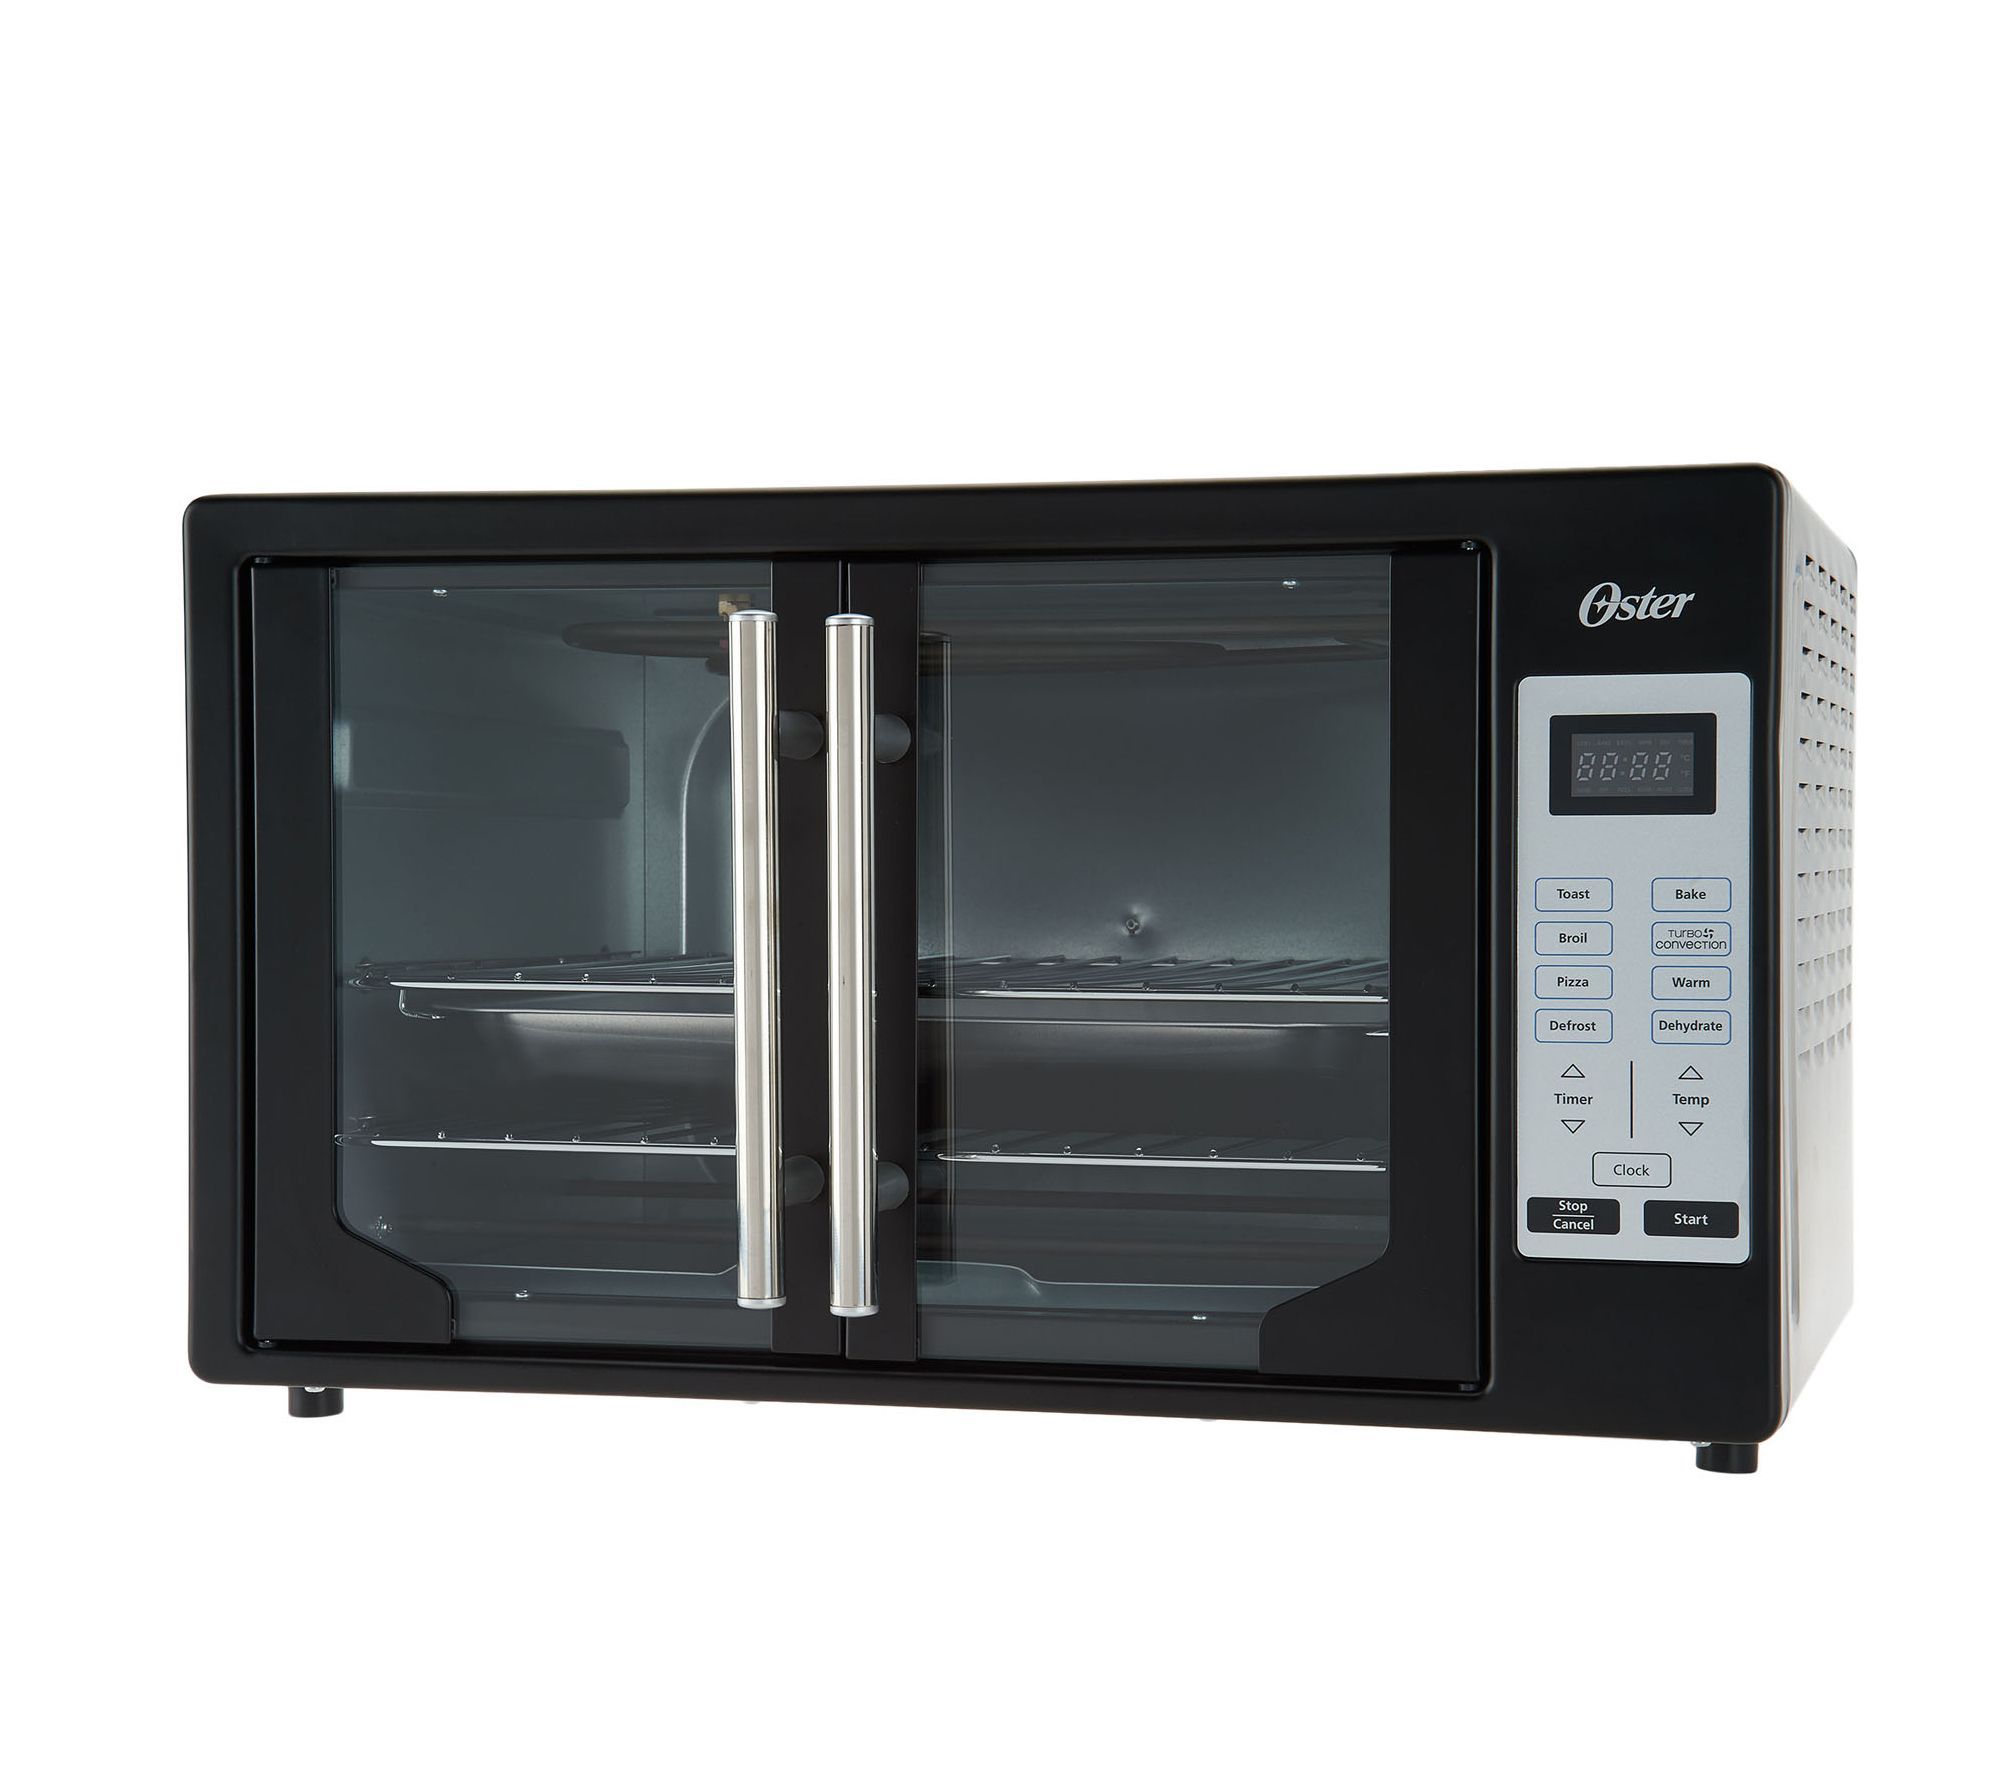 Oster XL Digital Convection Oven w/ French Doors